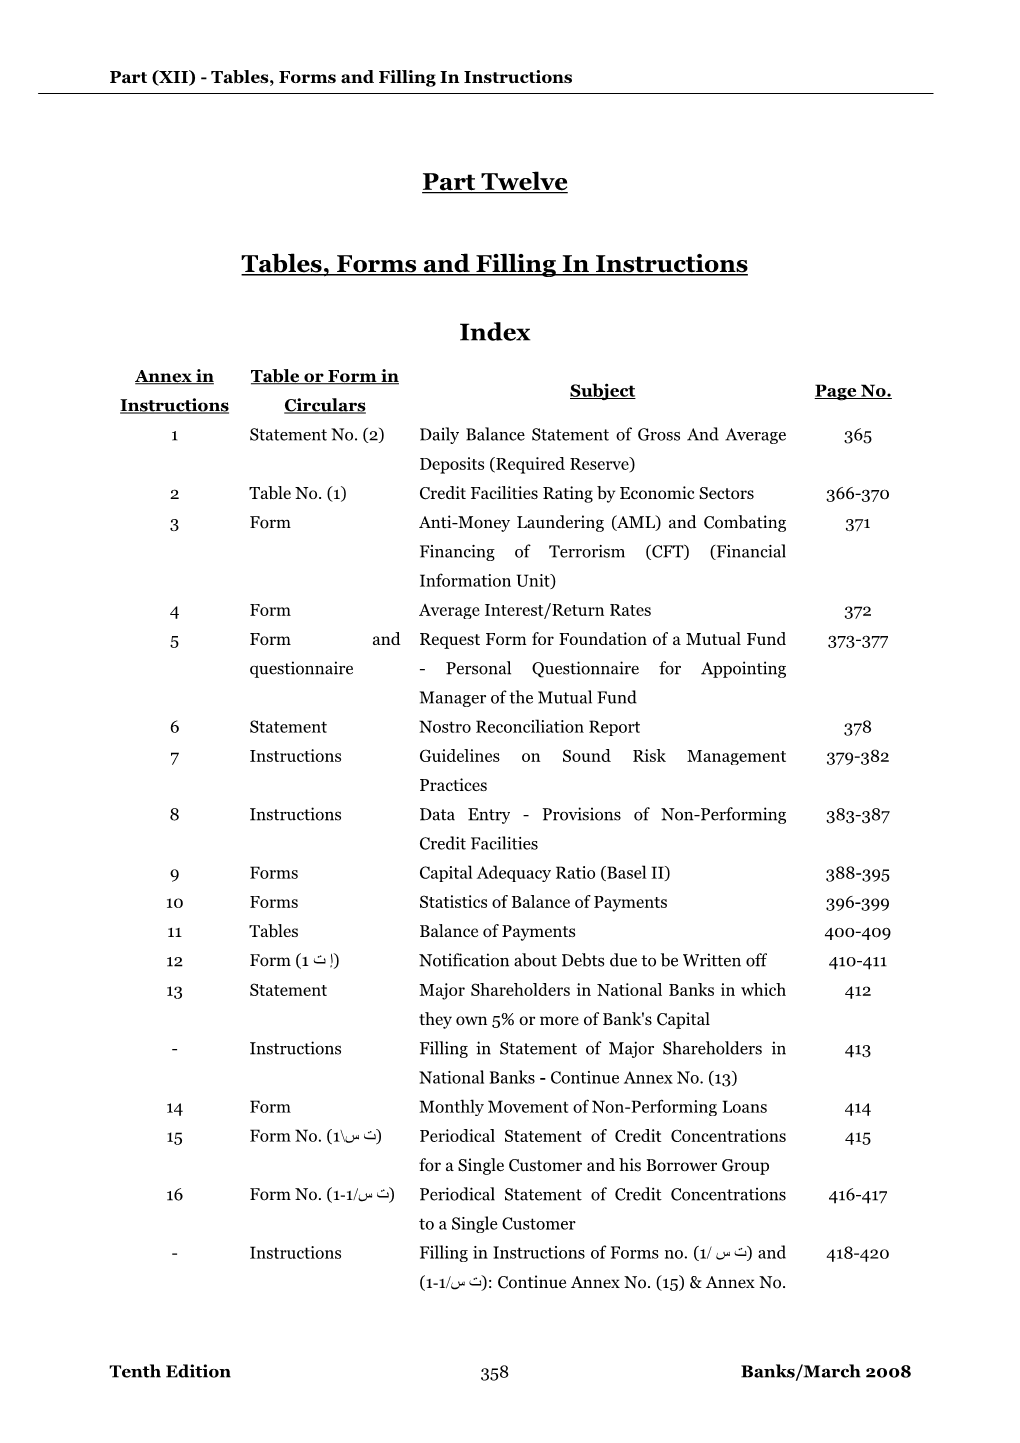 Part Twelve Tables, Forms and Filling in Instructions Index